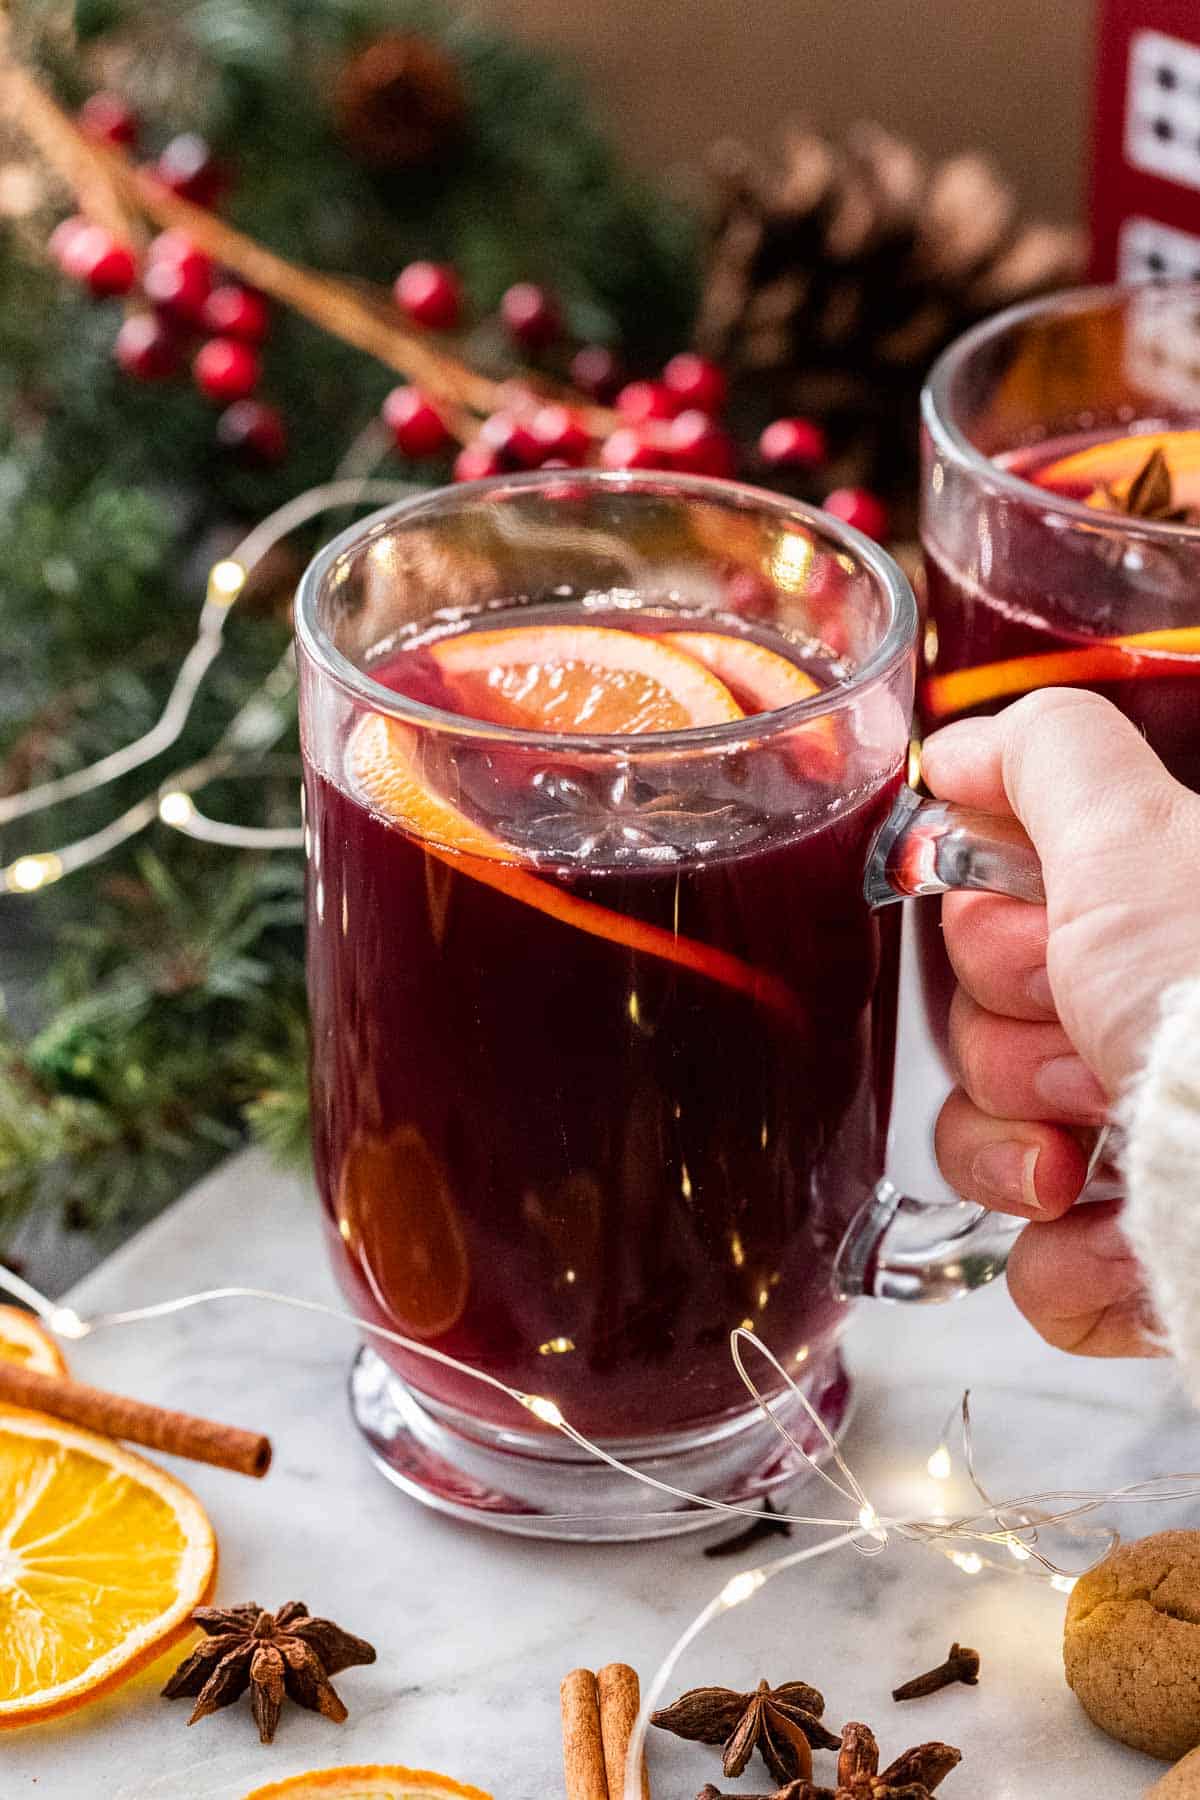 A hand holding a mug of mulled wine.